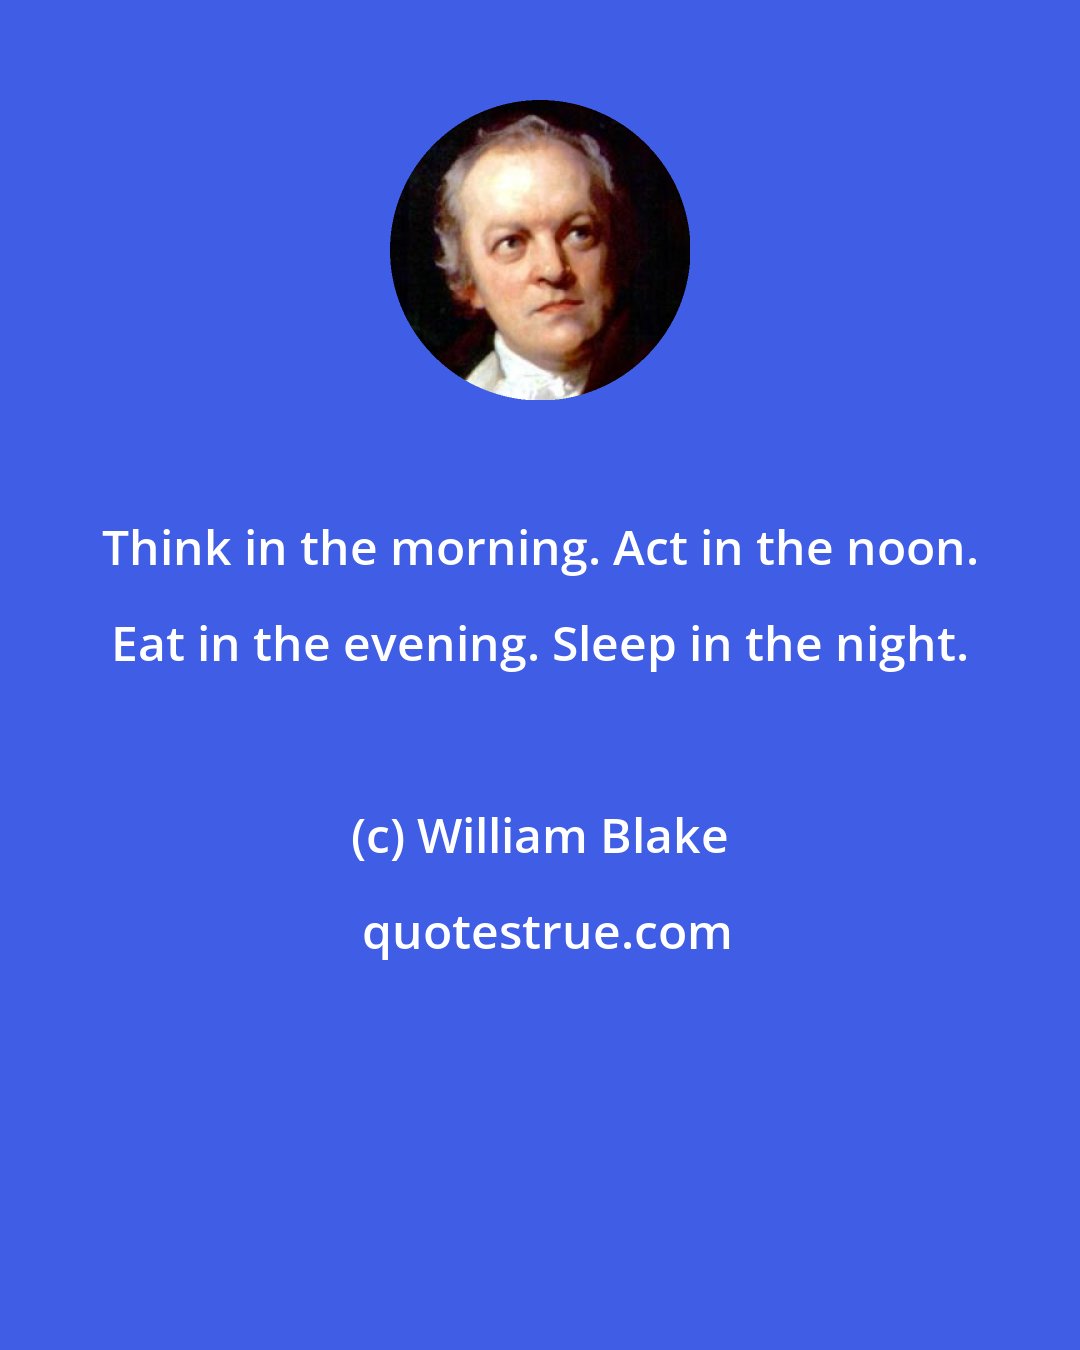 William Blake: Think in the morning. Act in the noon. Eat in the evening. Sleep in the night.